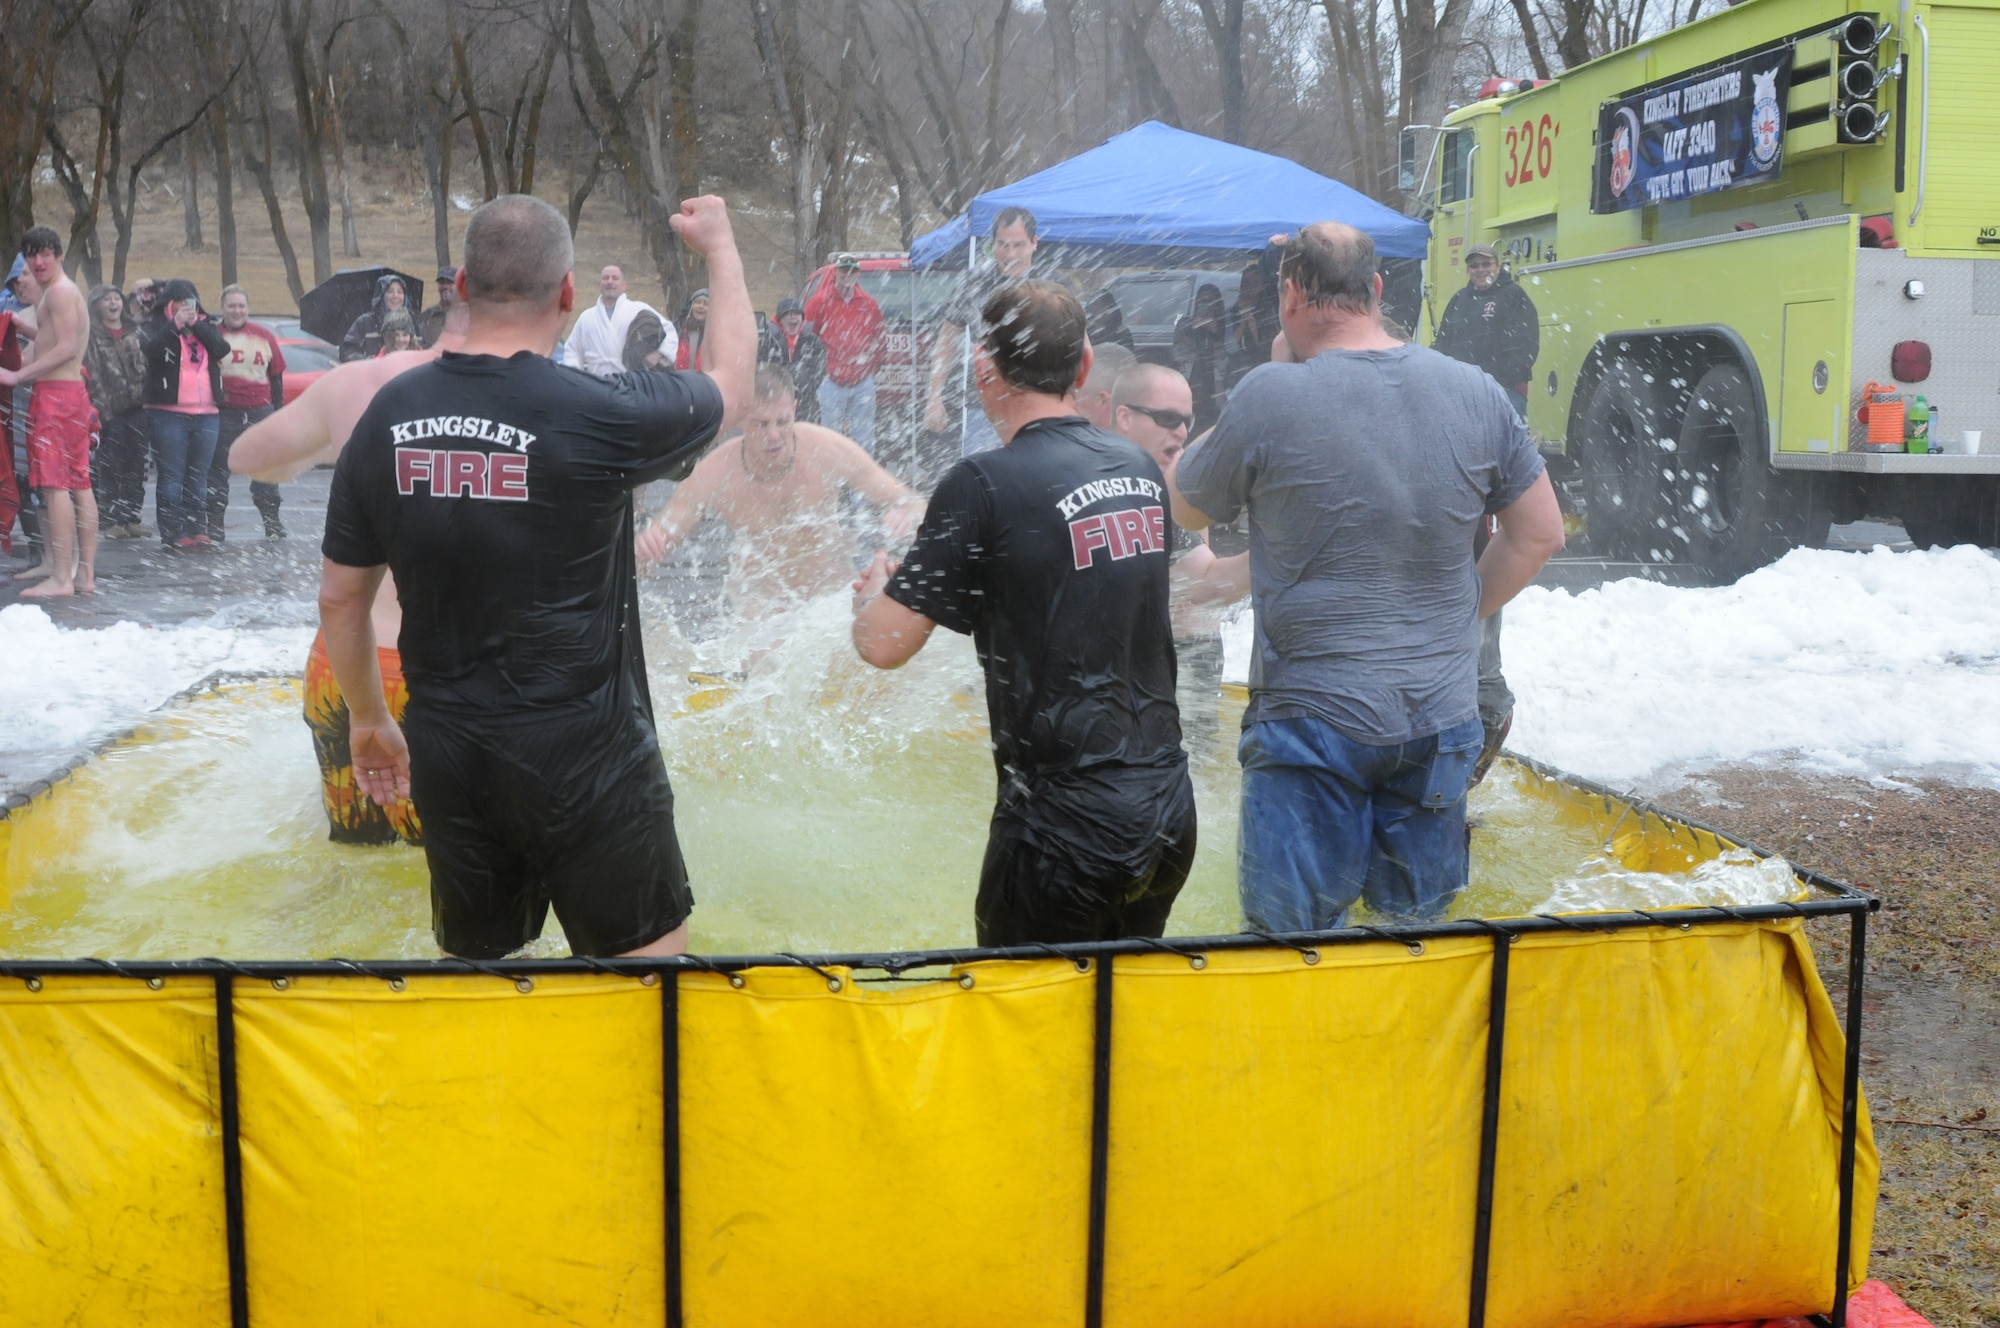 173rd Fighter Wing Firefighter Kyle Tecmire, center, lands in icy water during the Polar Plunge held on a rainy Saturday, Feb. 8, 2014 at Moore Park, Klamath Falls, Ore. The 173rd Fire Department raised nearly $600 for the event and they say they are excited to see what they can do next year. (U.S. Air National Guard photo by Tech. Sgt. Jefferson Thompson/Released)